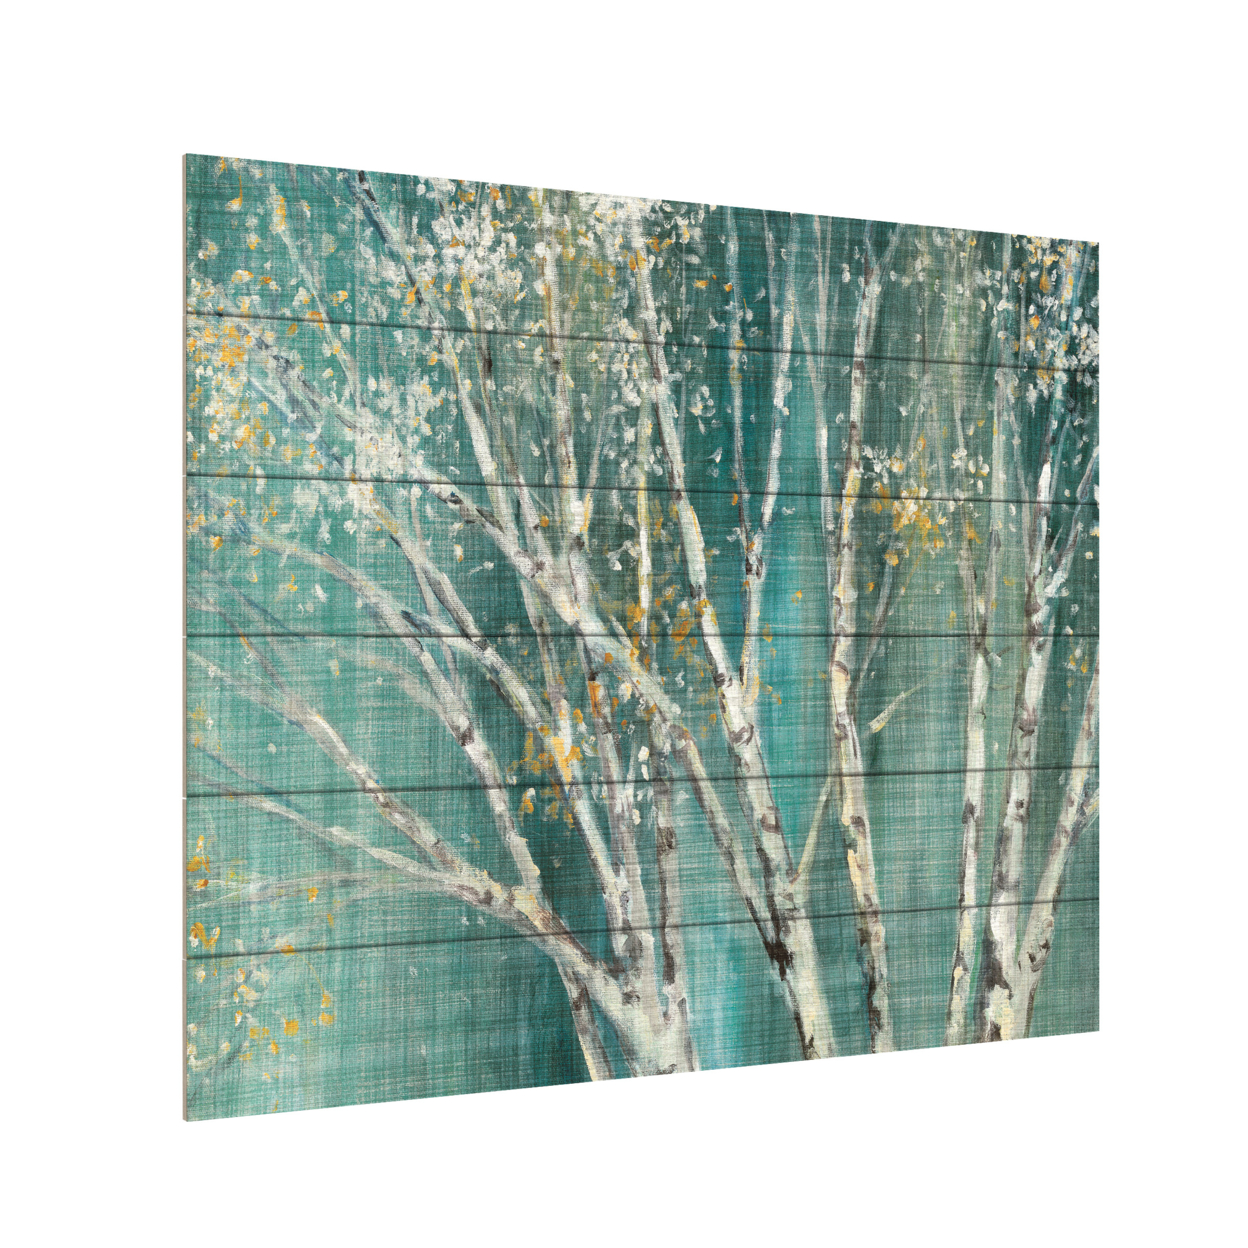 Wooden Slat Art 18 X 22 Inches Titled Blue Birch Ready To Hang Home Decor Picture